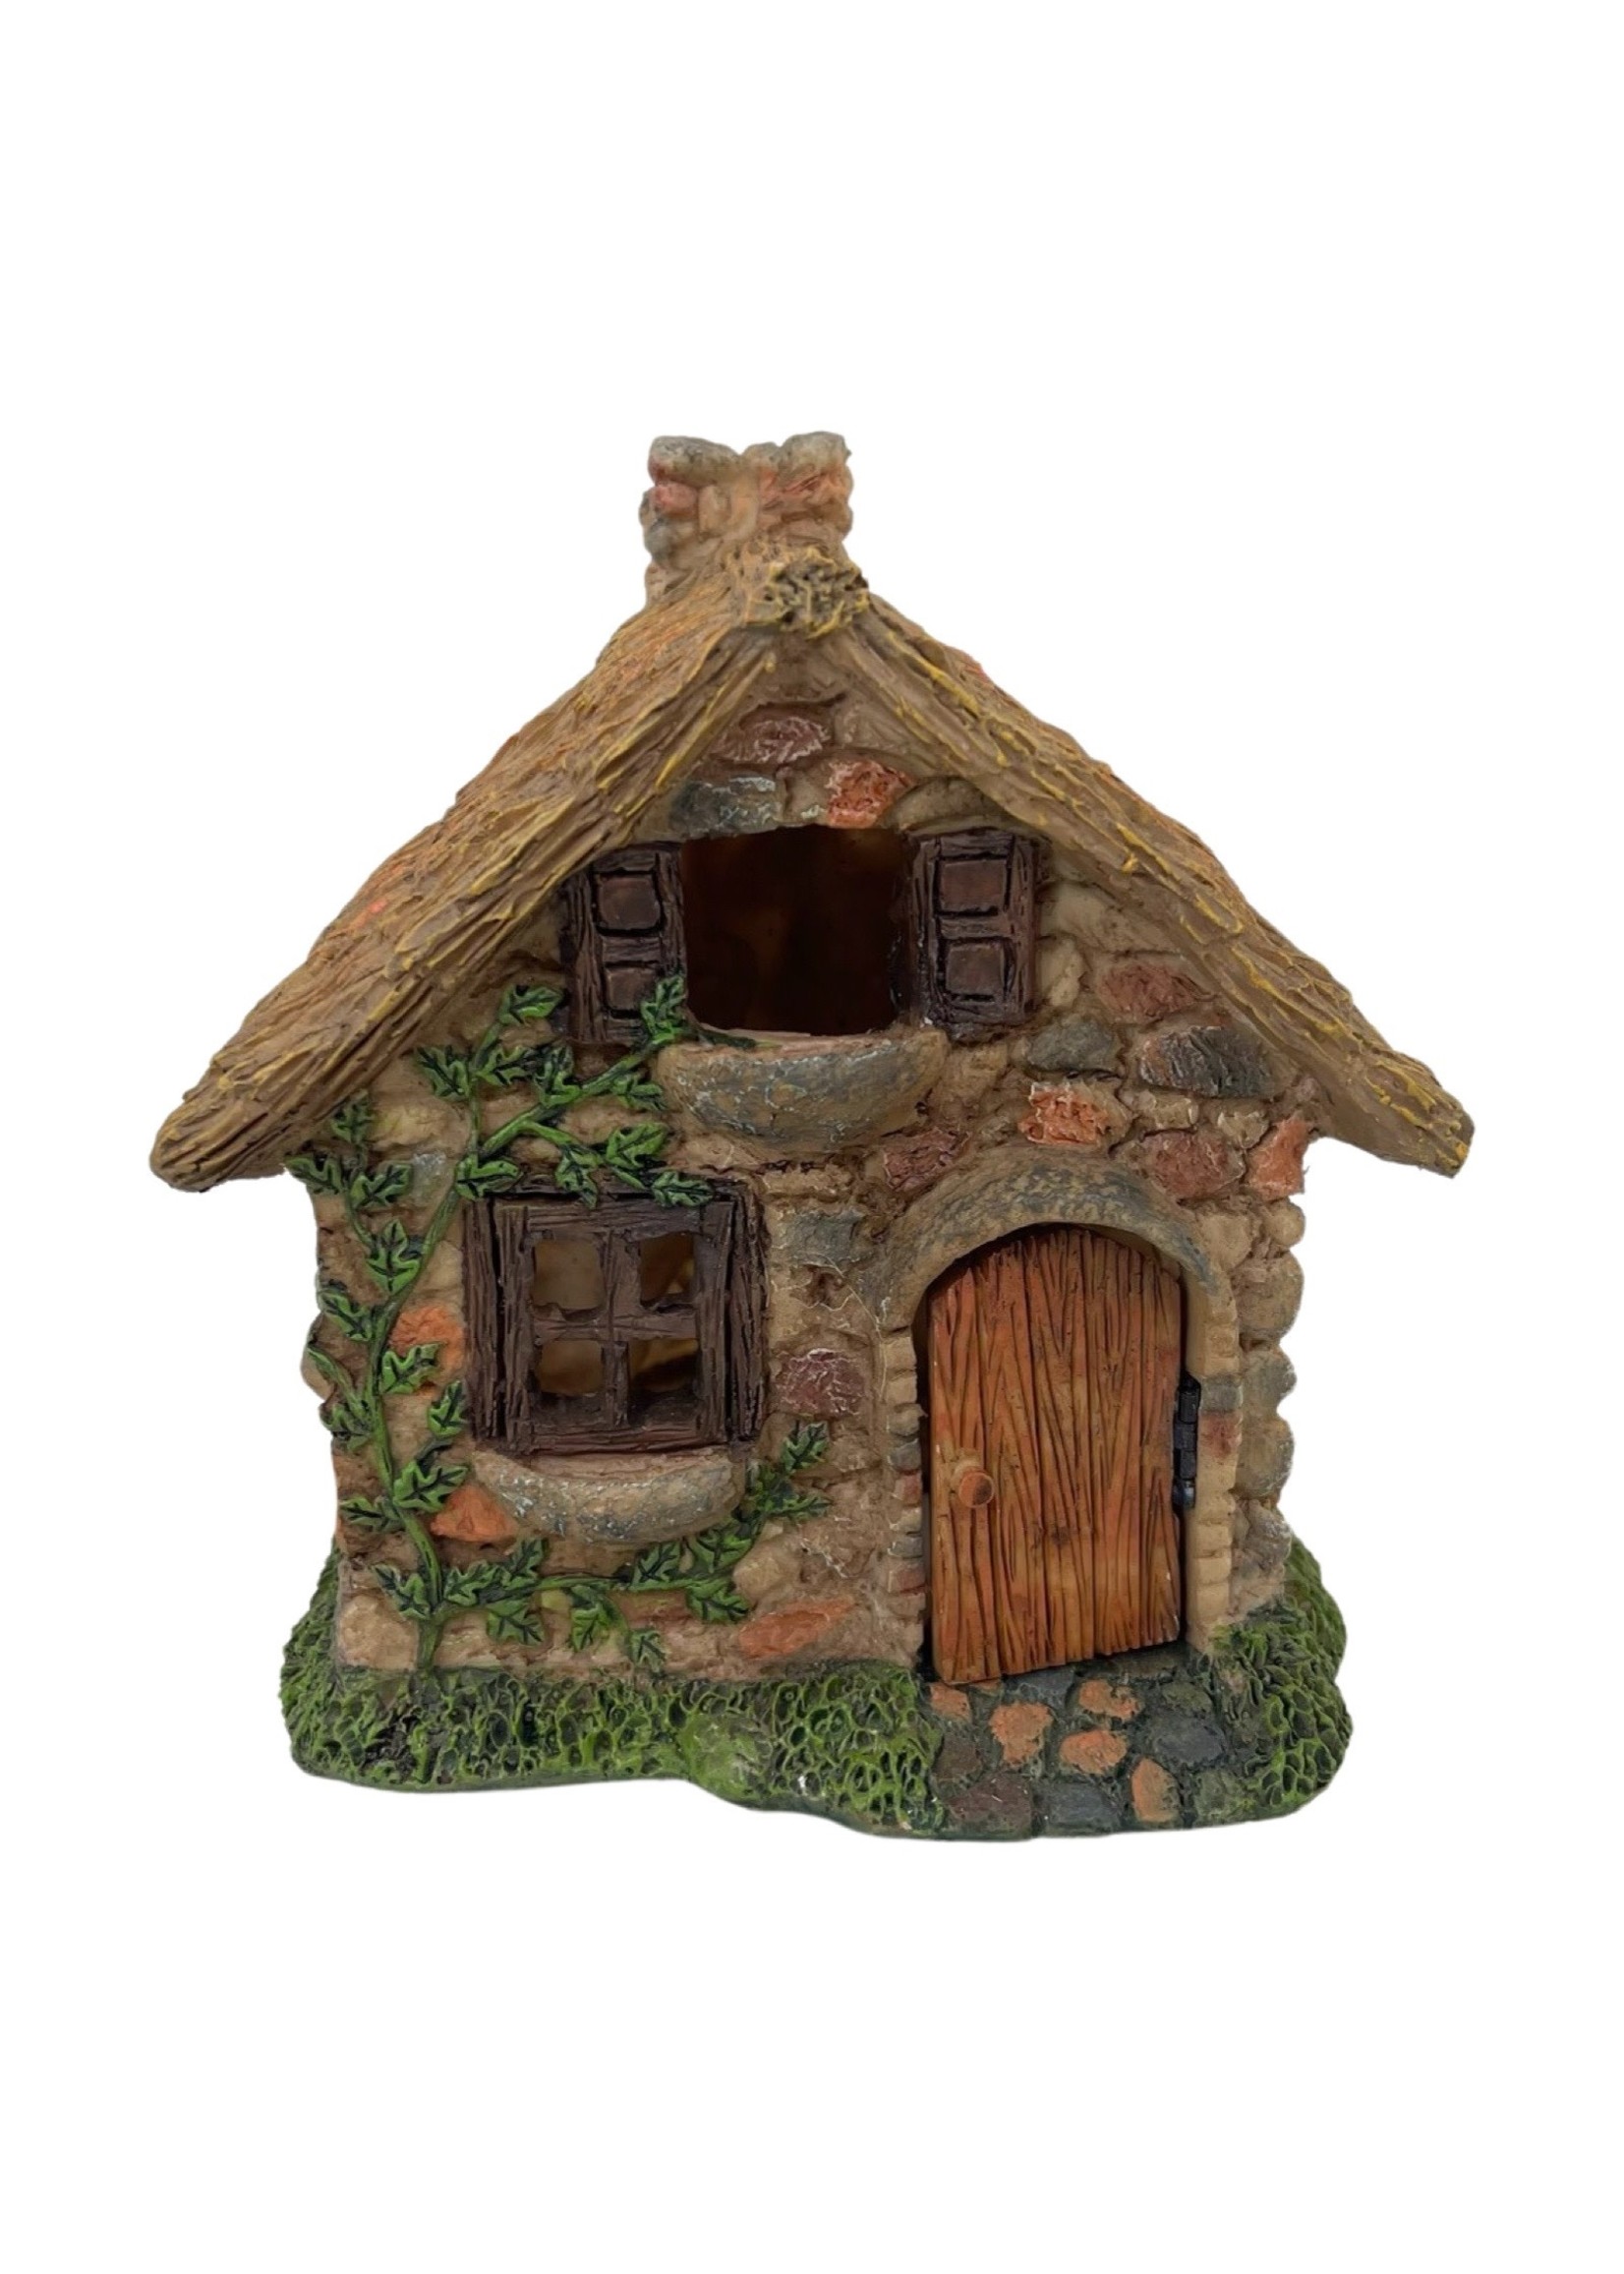 Fairy Thatched Roof House